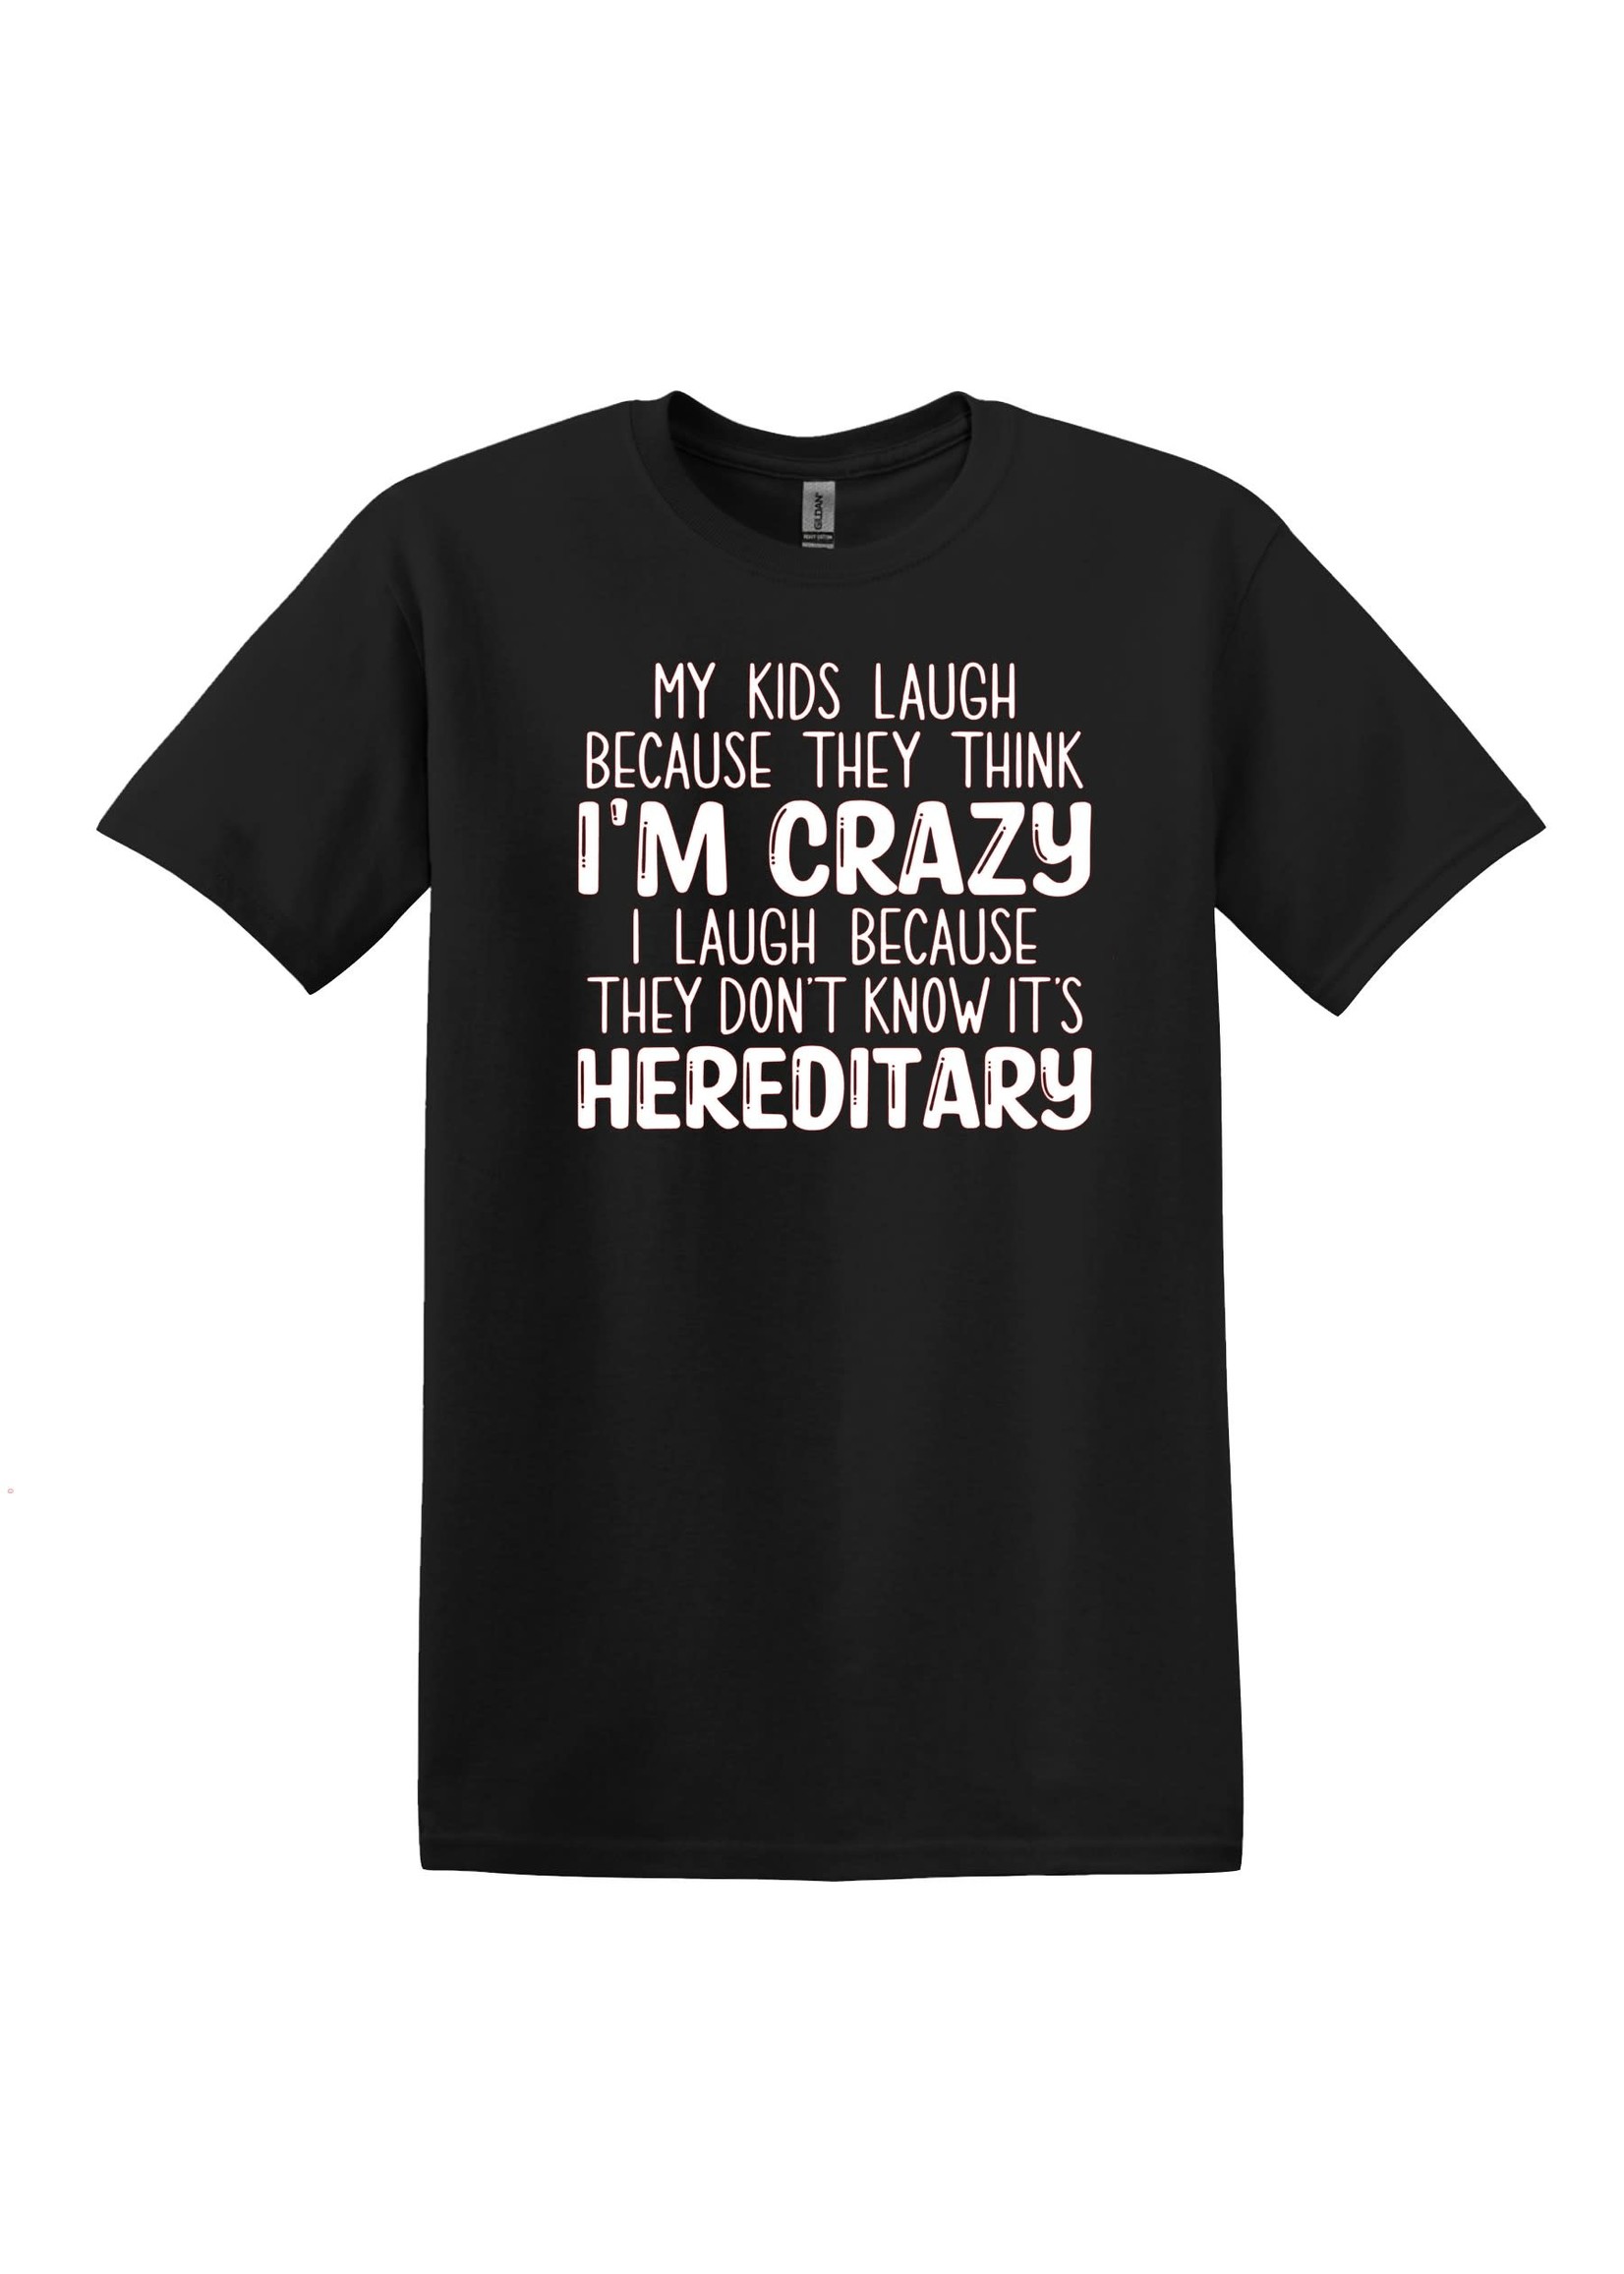 My kids laugh because they think I'm crazy